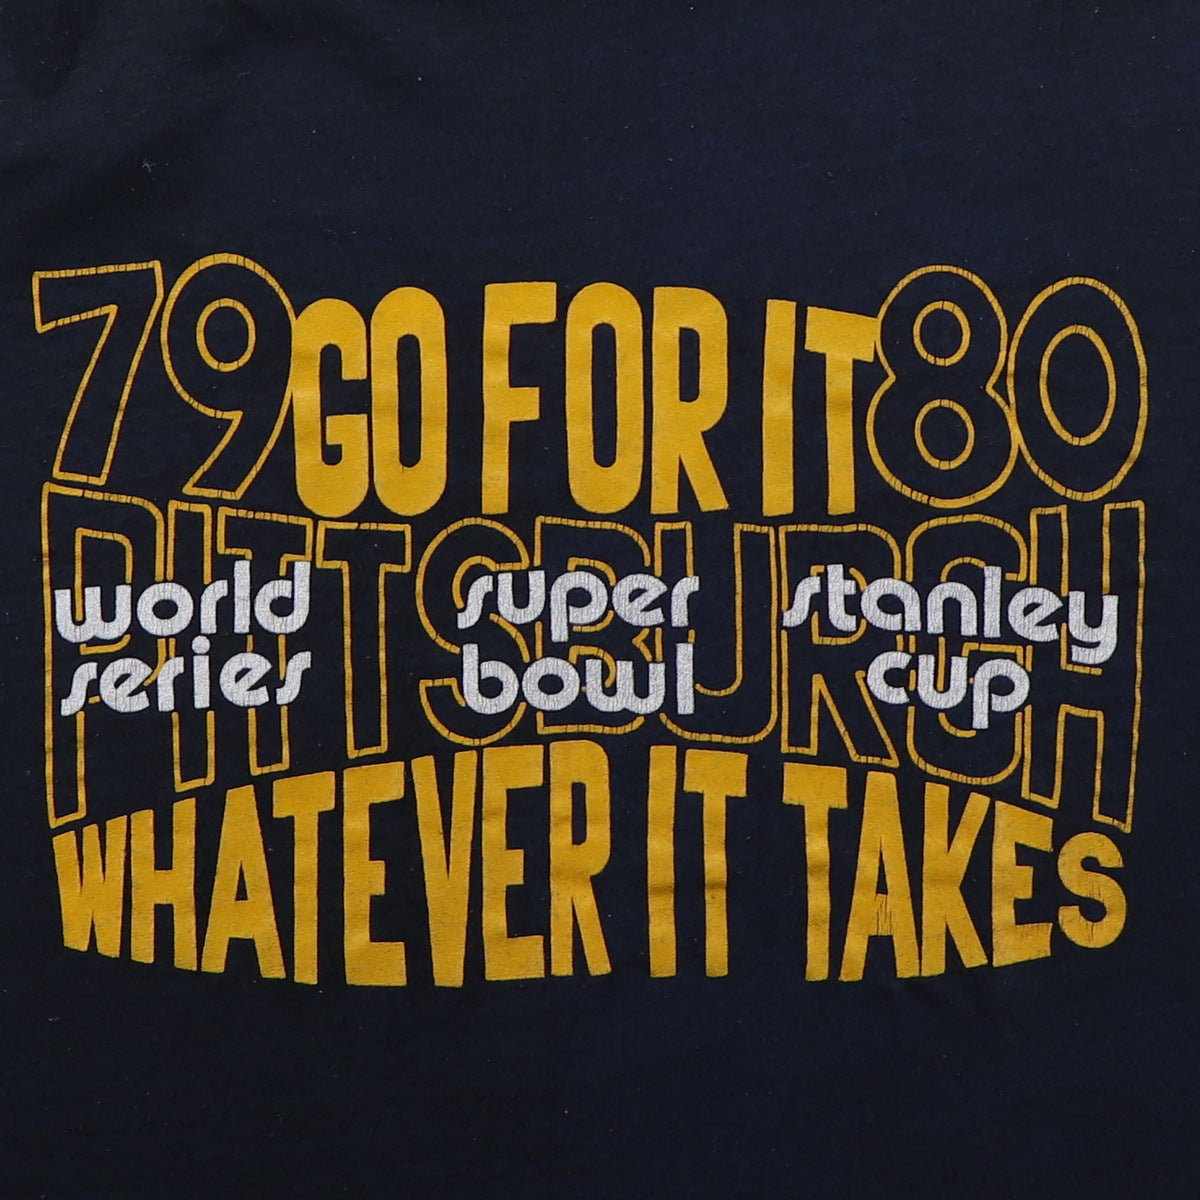 1979 Pittsburgh Whatever It Takes Shirt